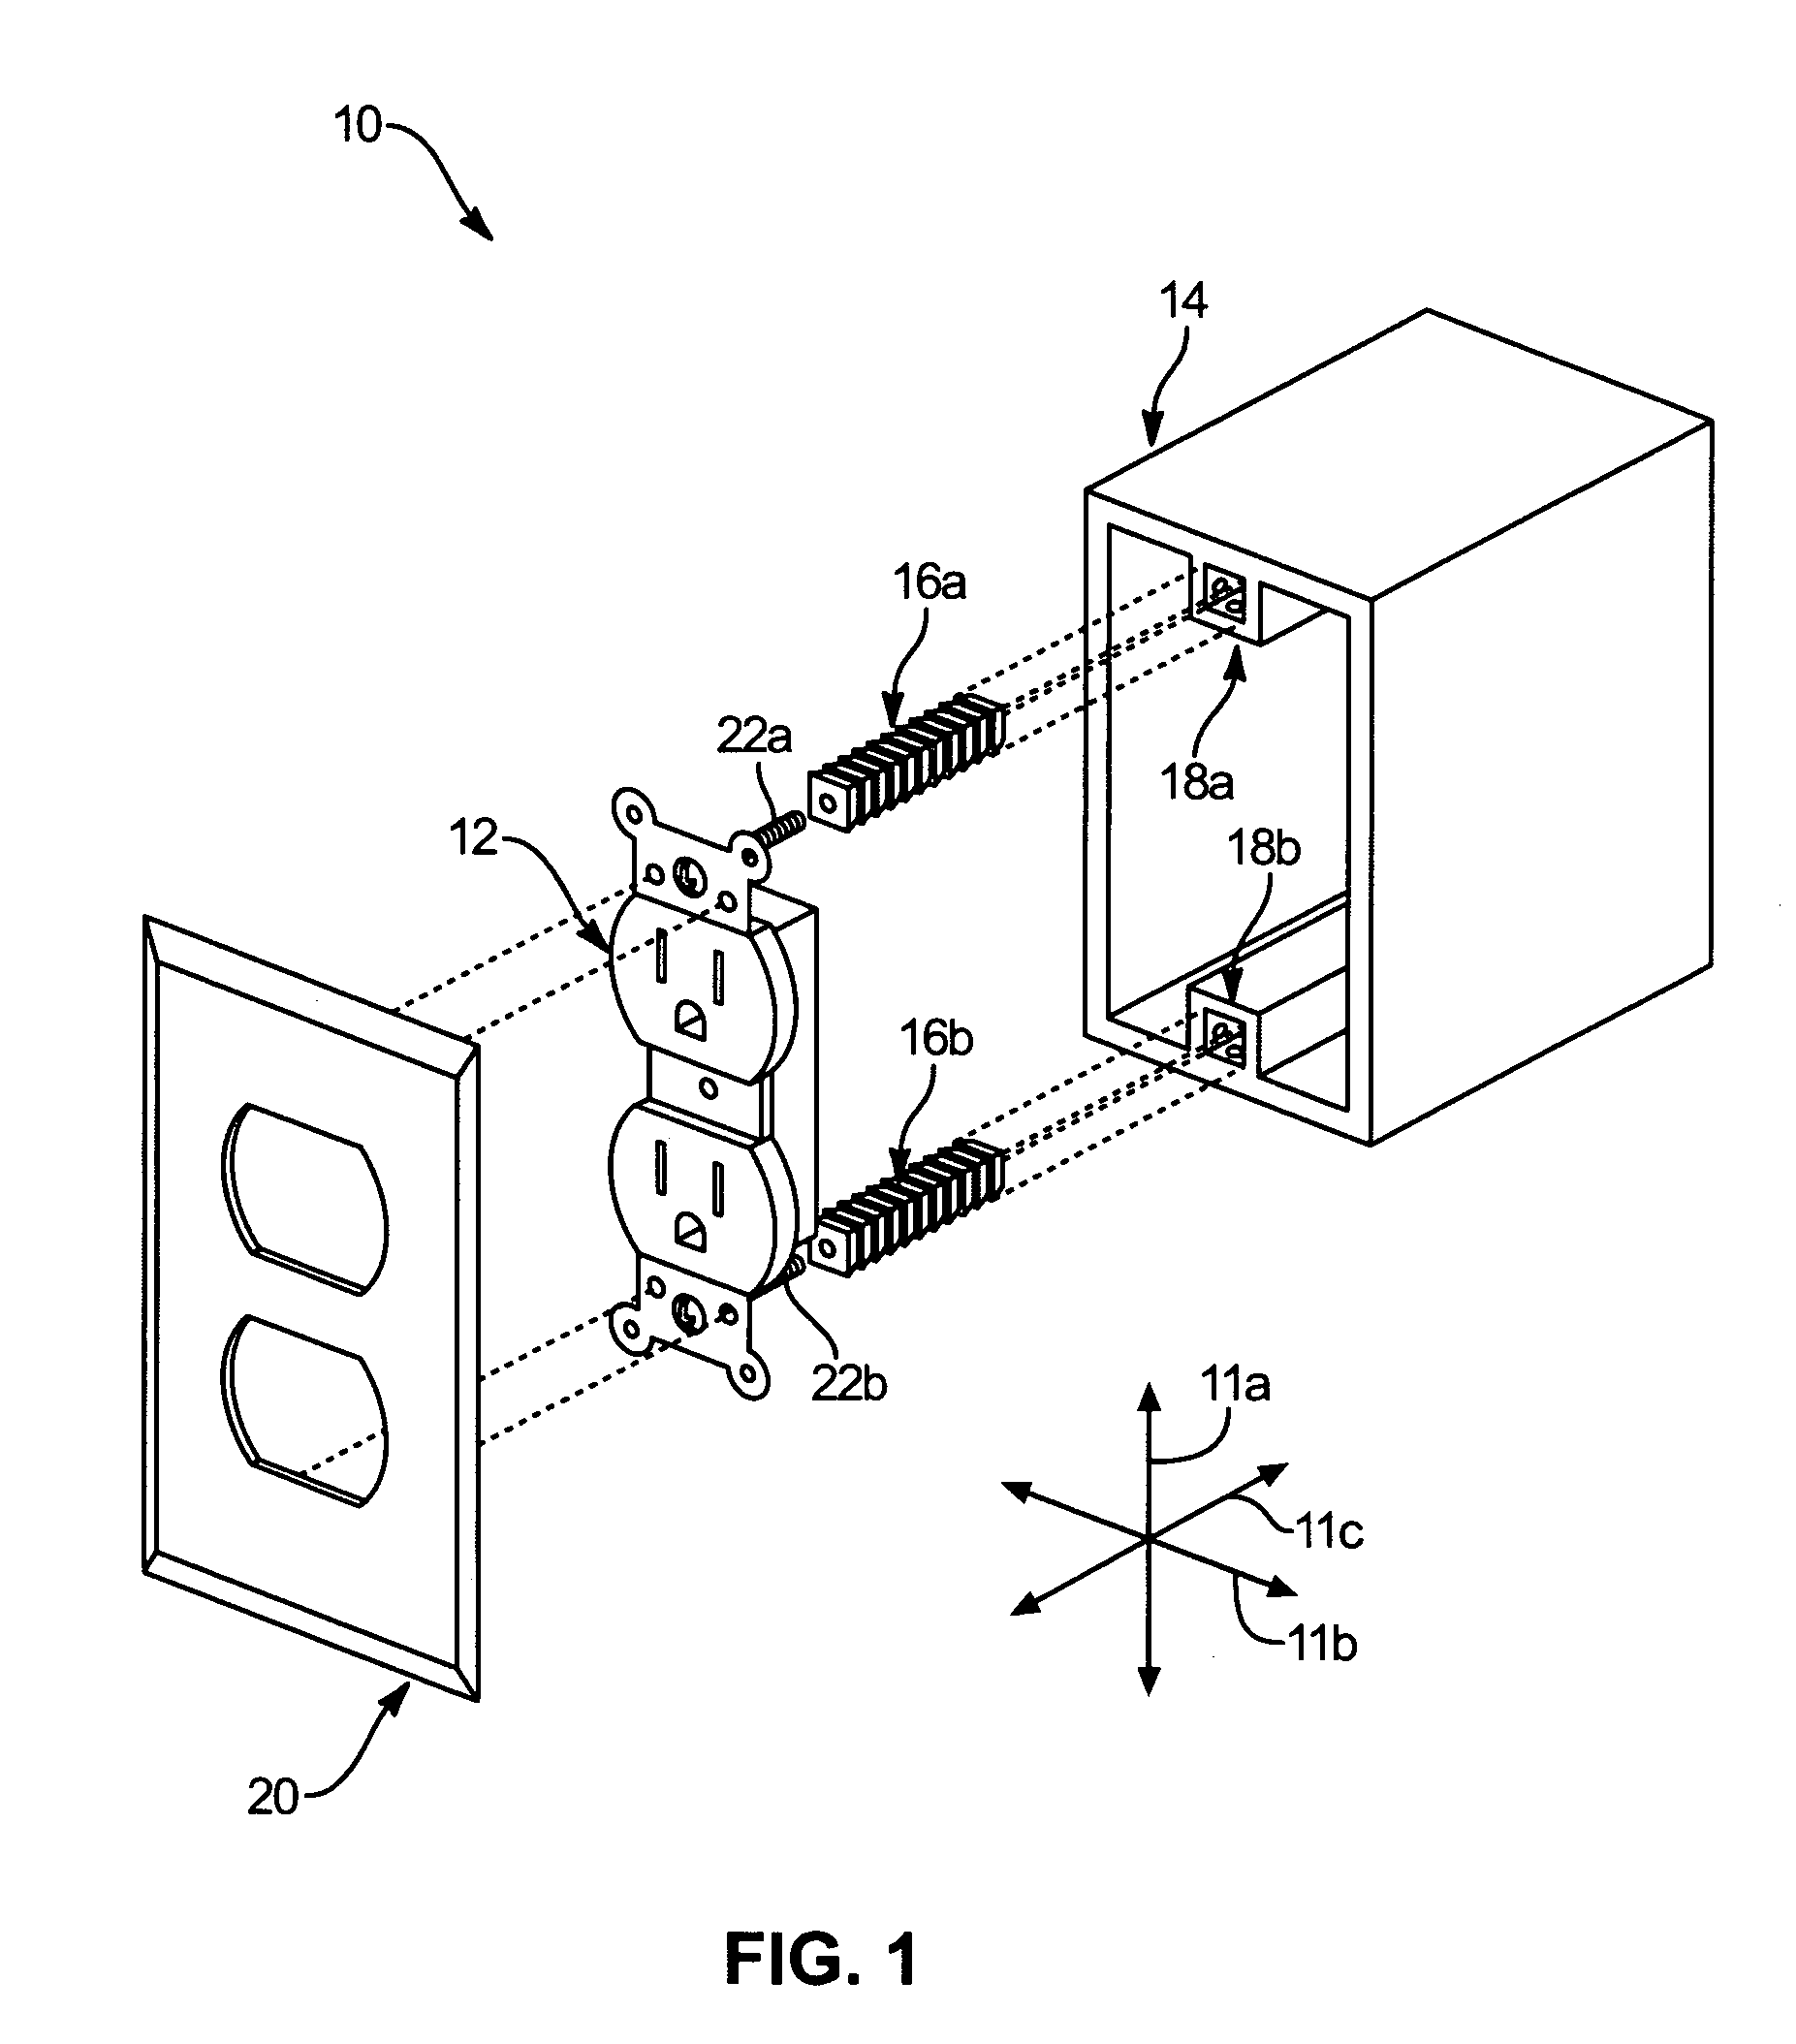 Clip-on face plate for electrical fixtures